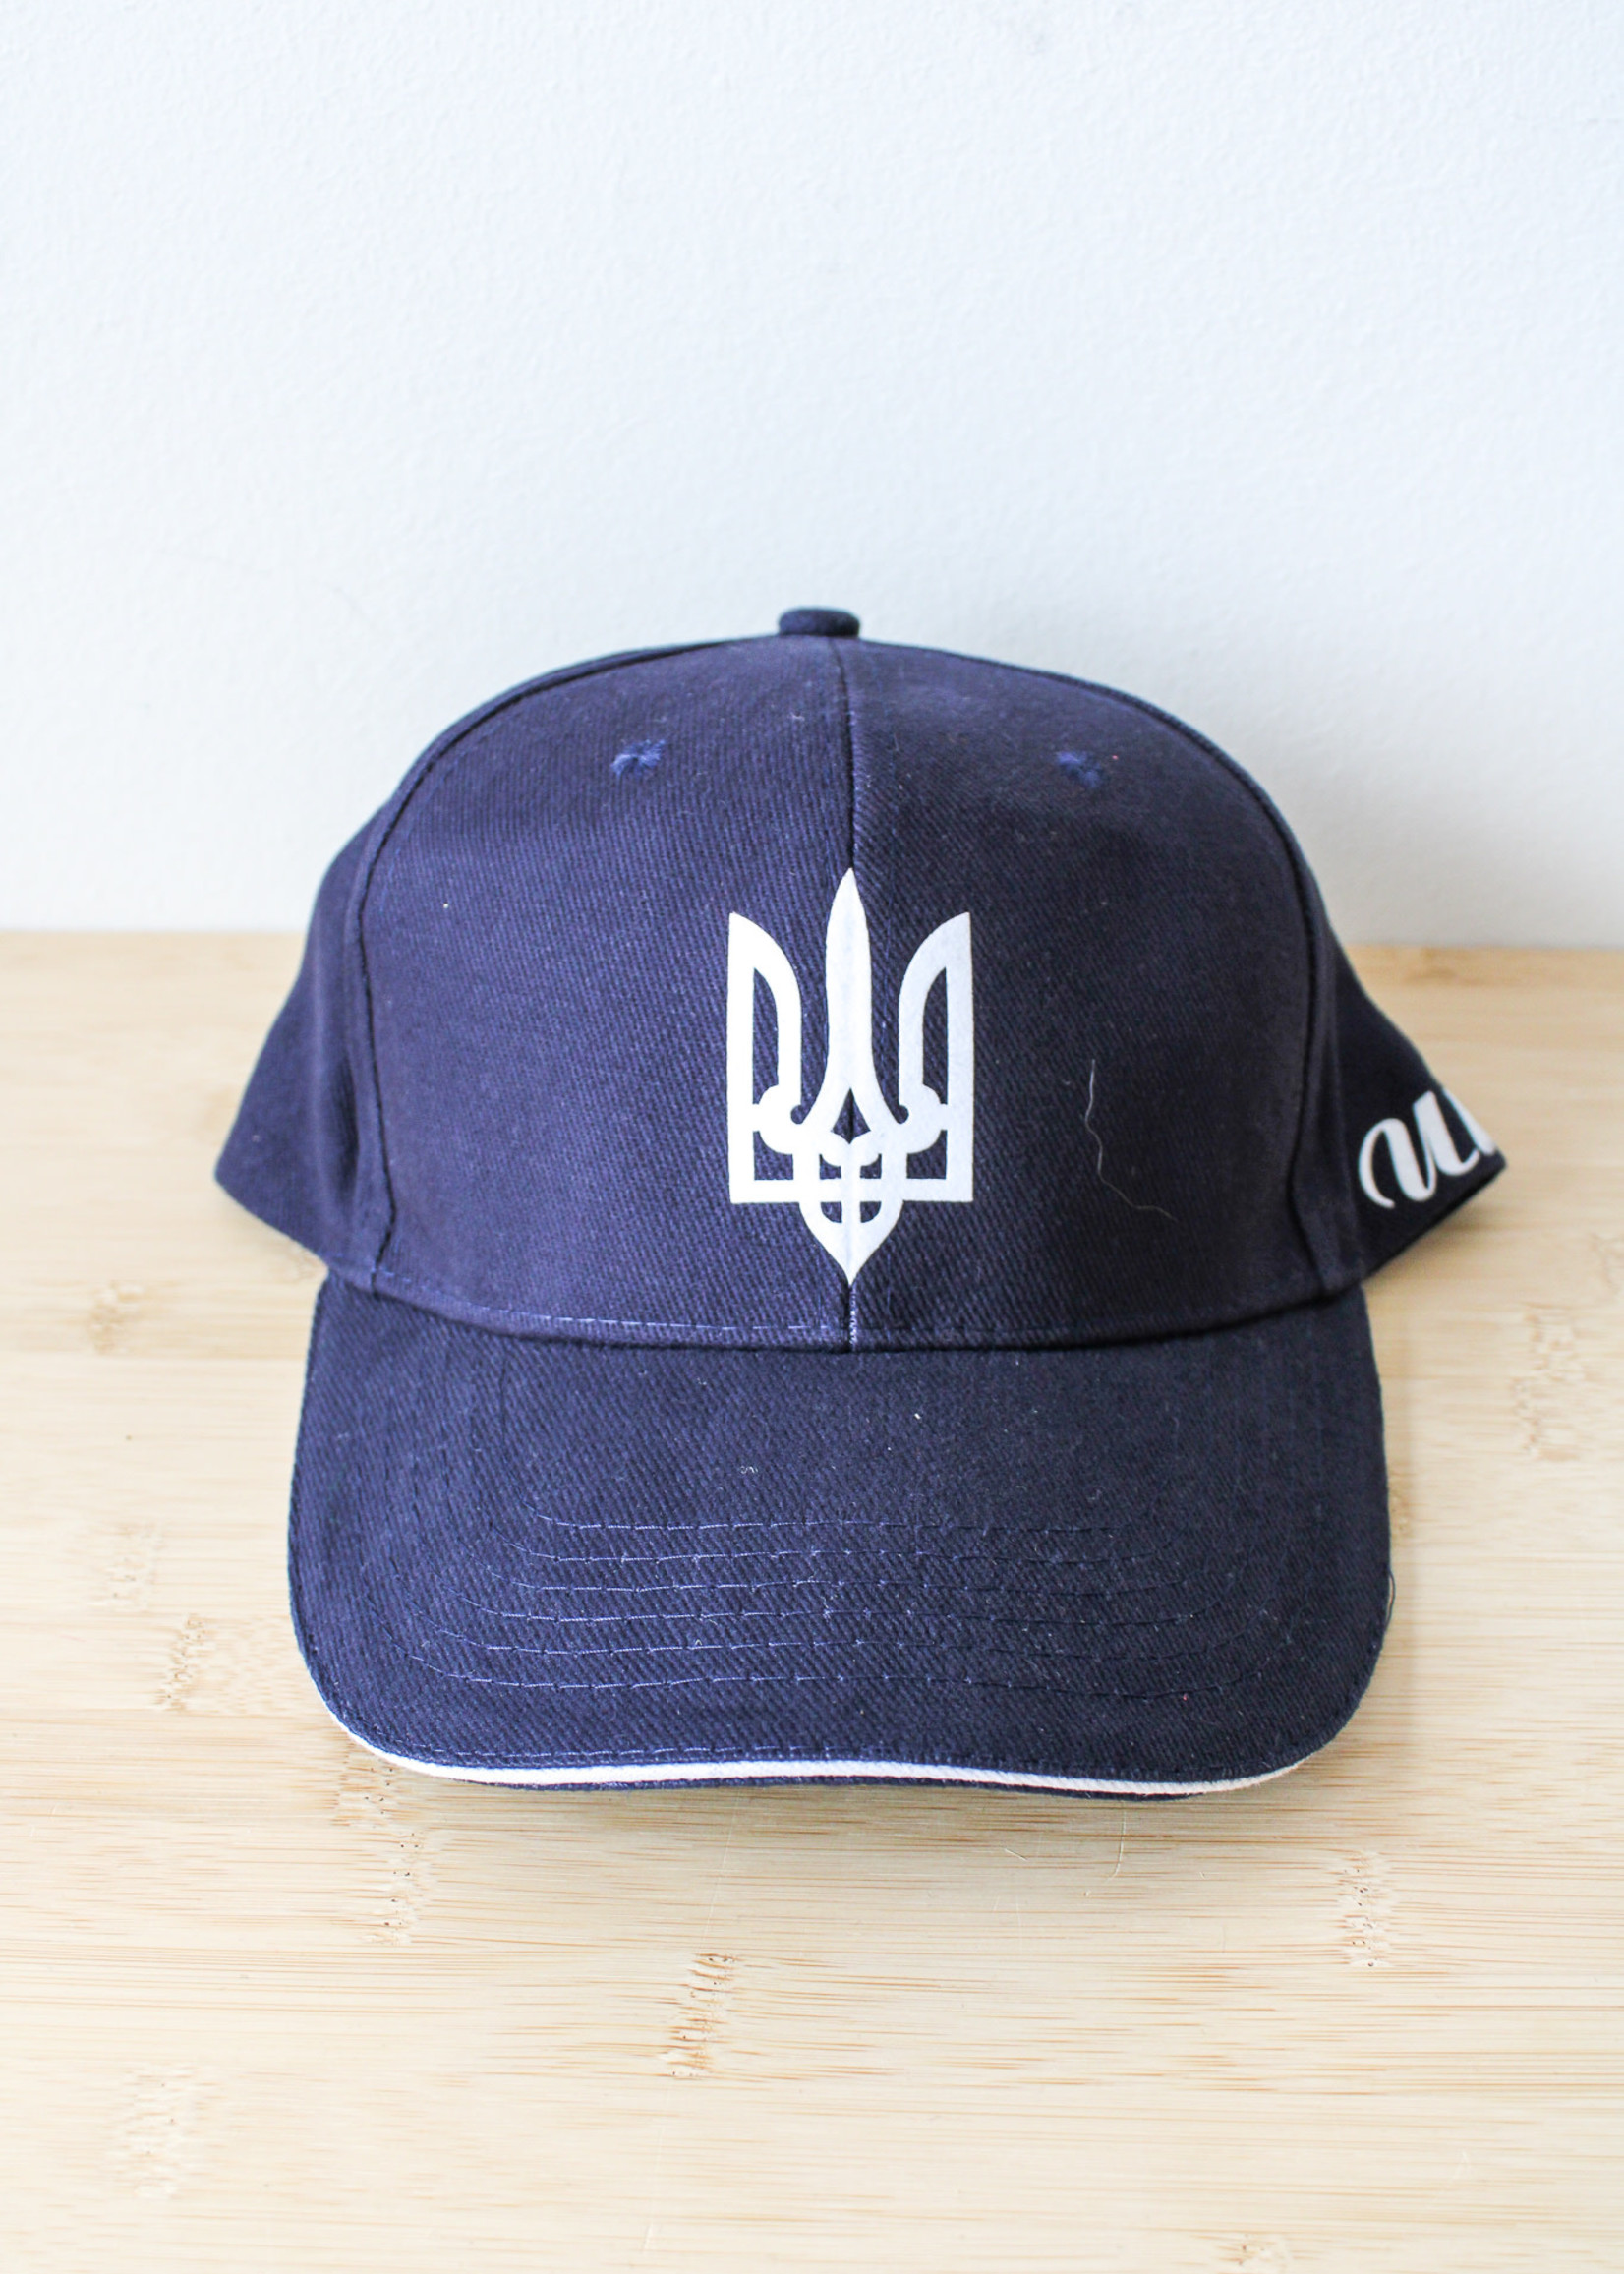 CAP  -Navy Blue  Baseball hat  with  Tryzub and  sign  Ukraine